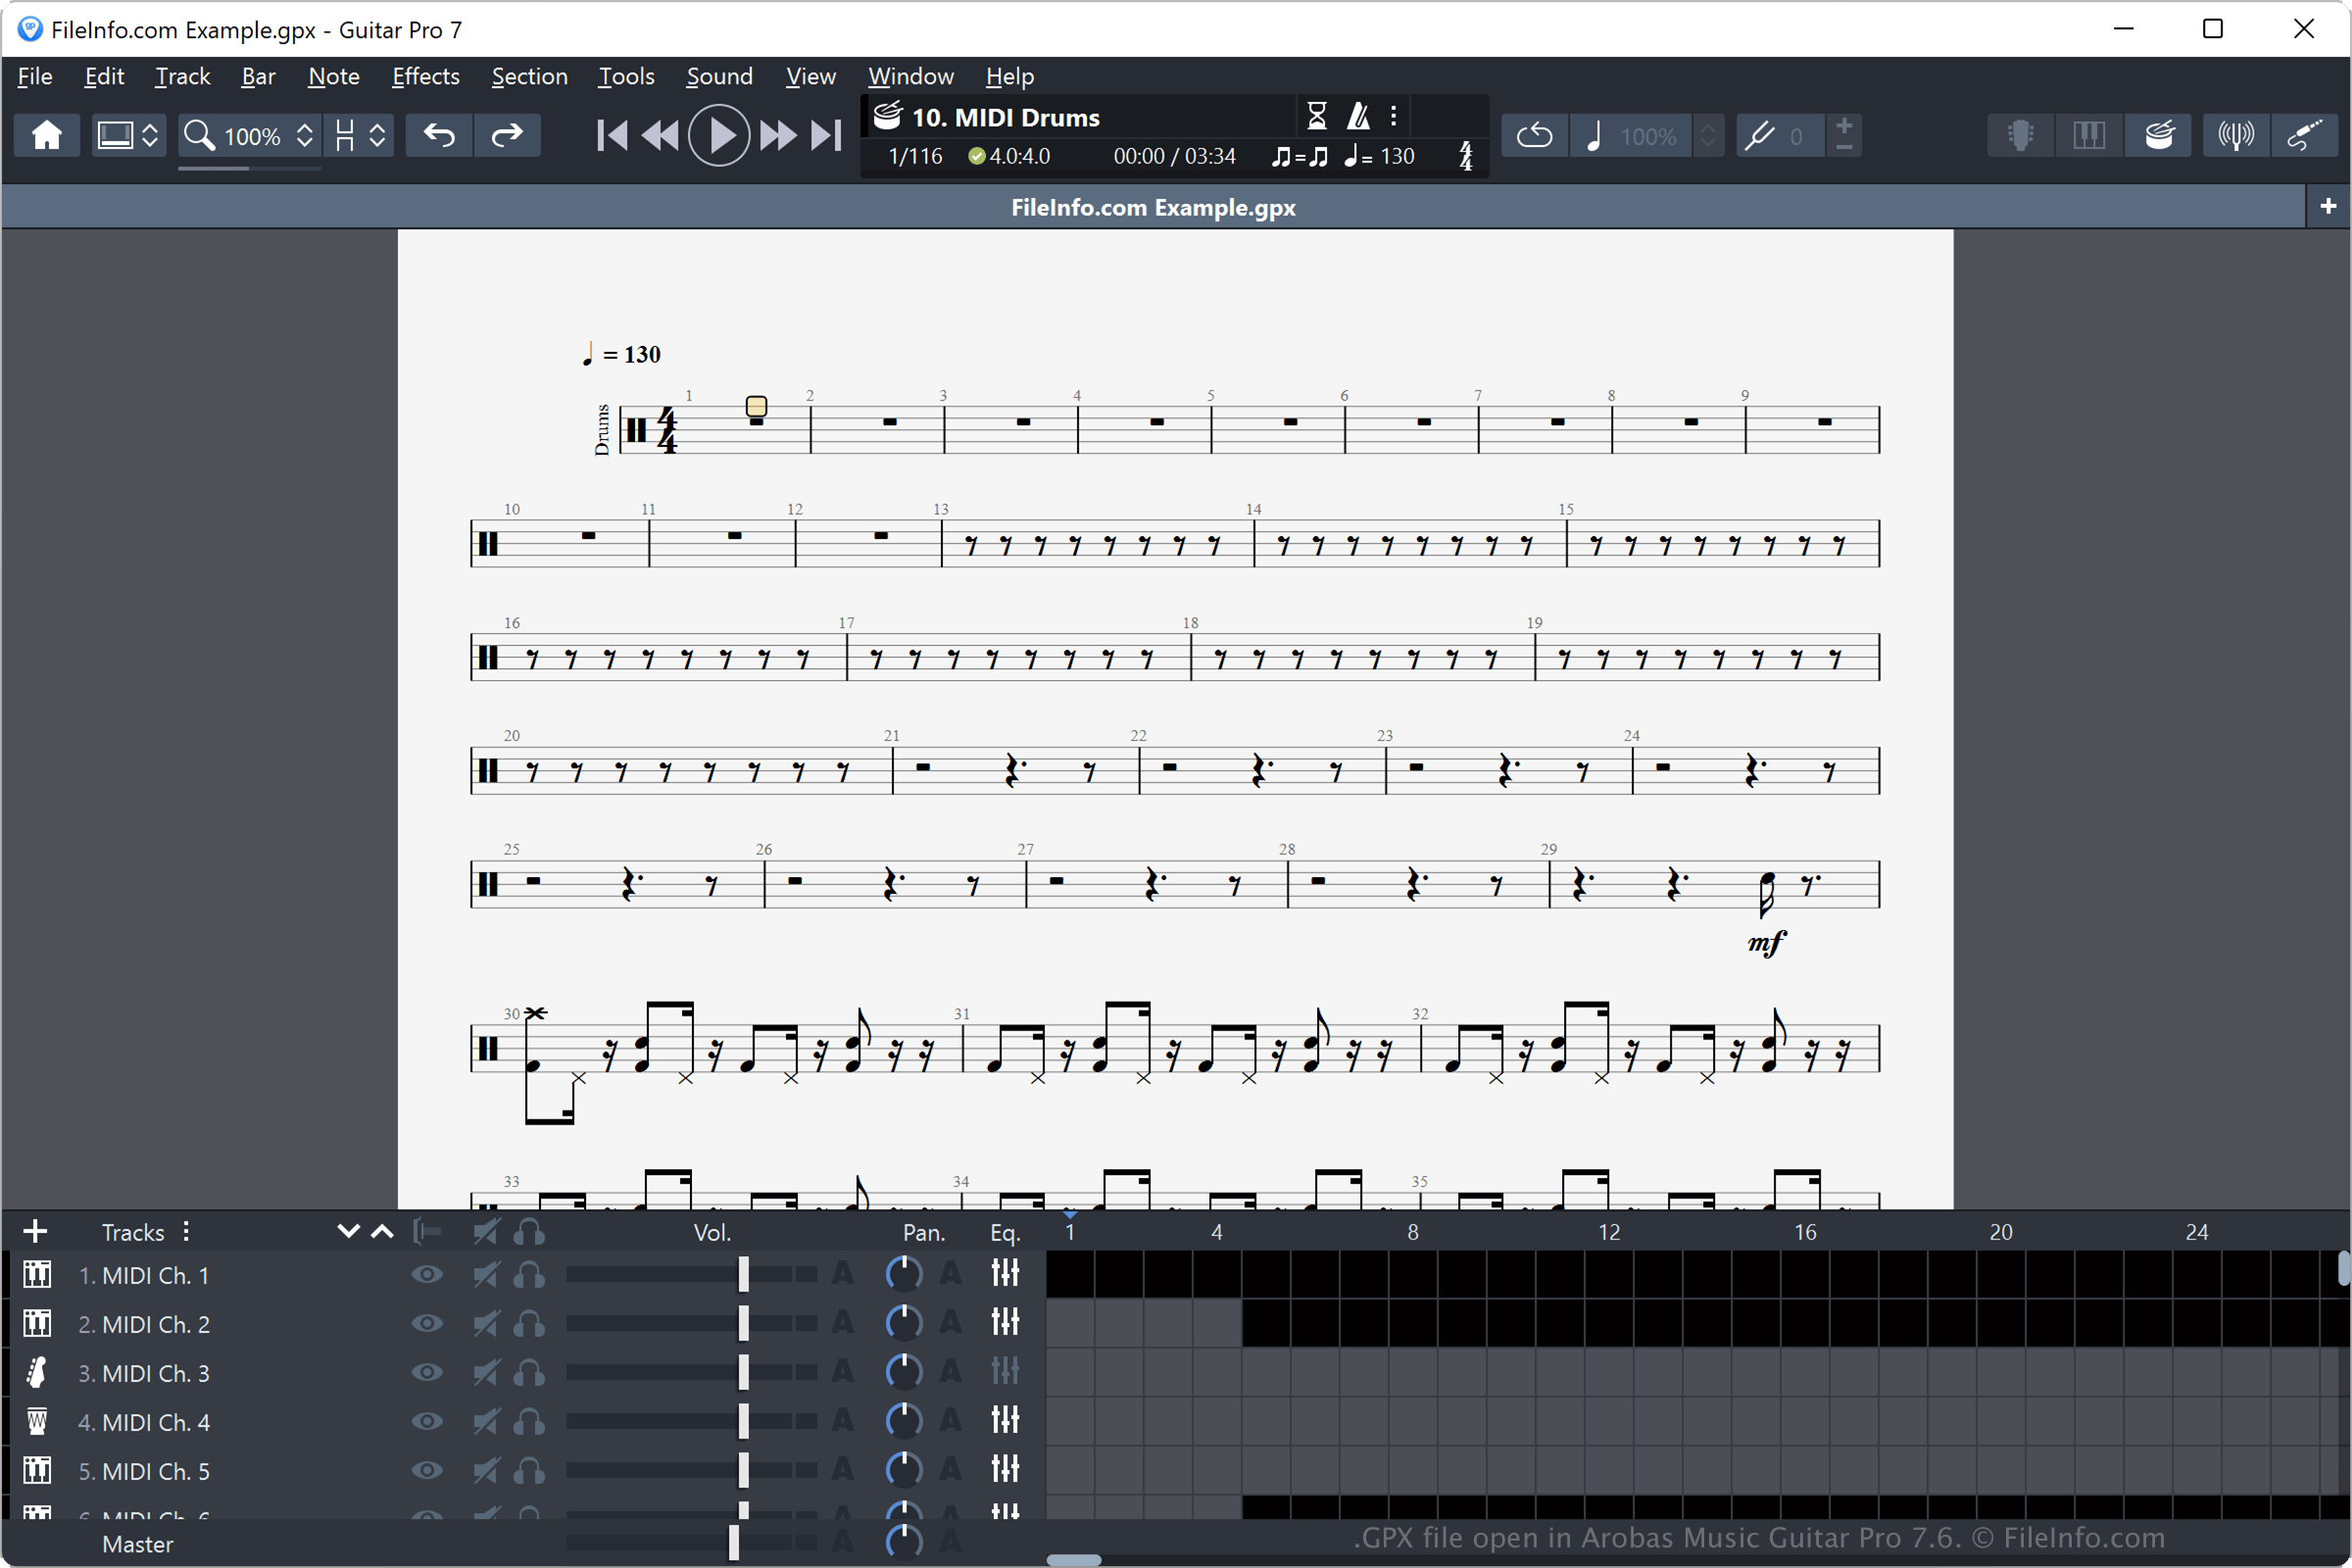 guitar pro gpx file viewer